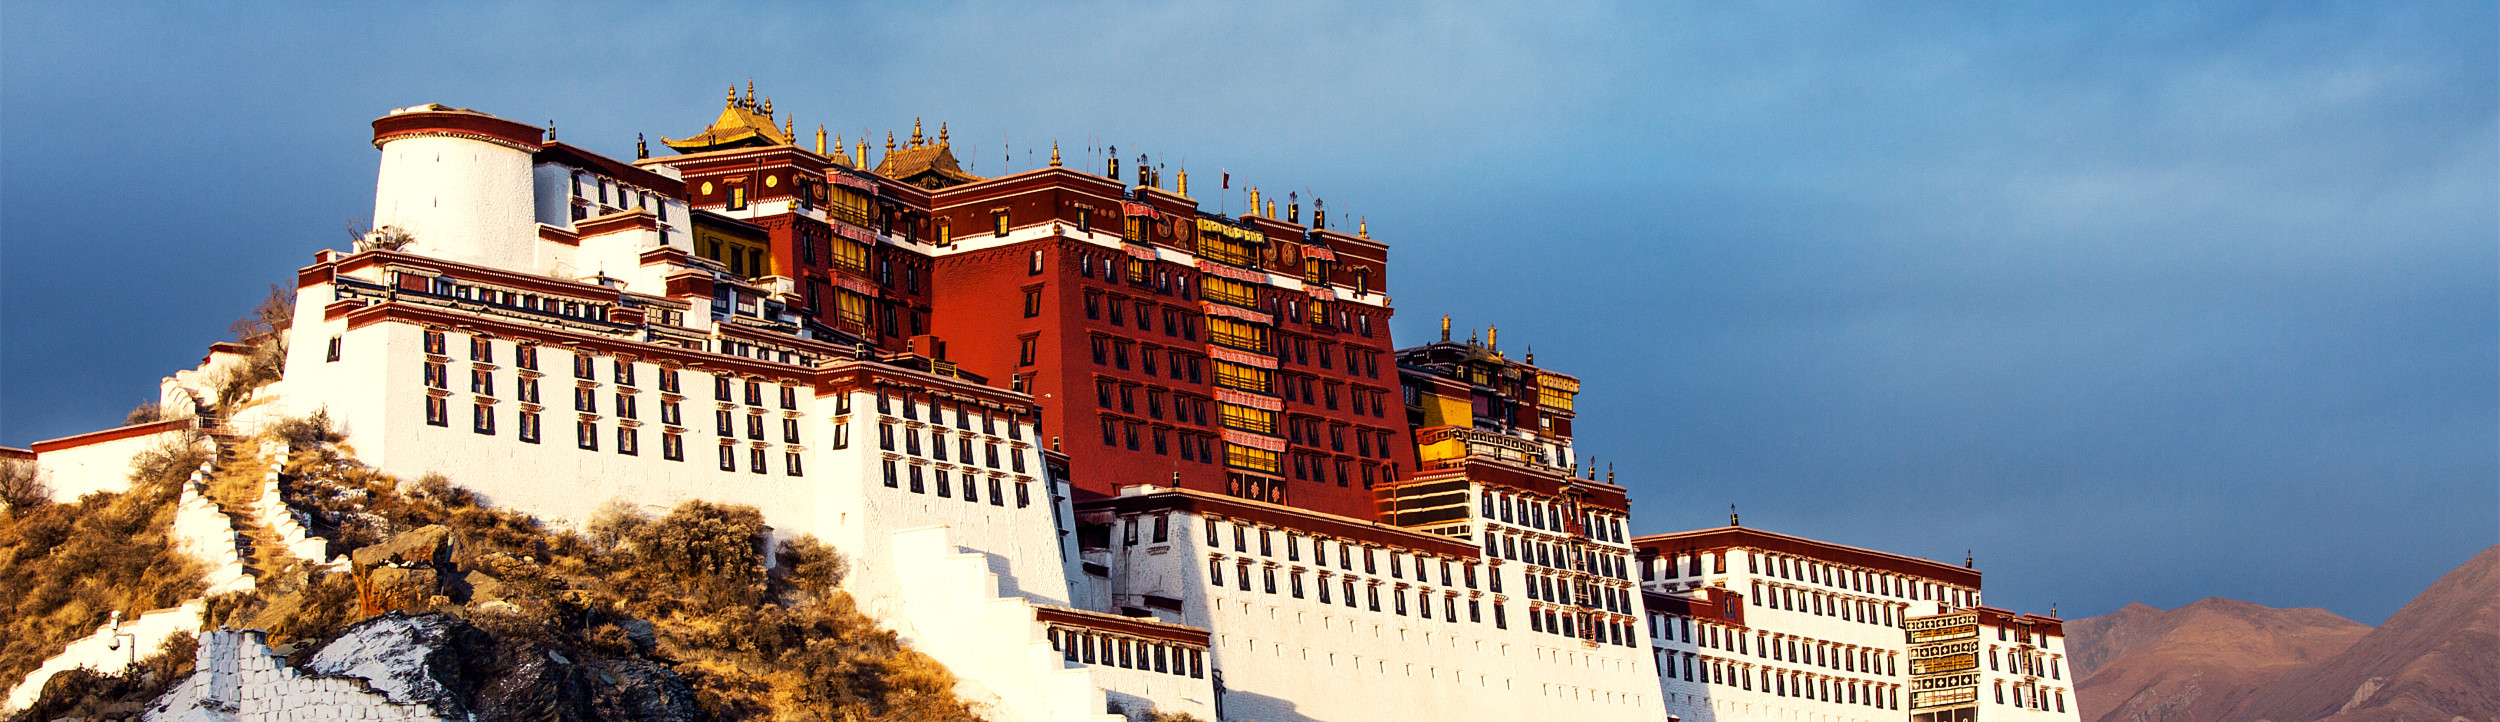 Tibet is located in the southern part of the Qinghai-Tibet Plateau and stands at the southwestern border of China.